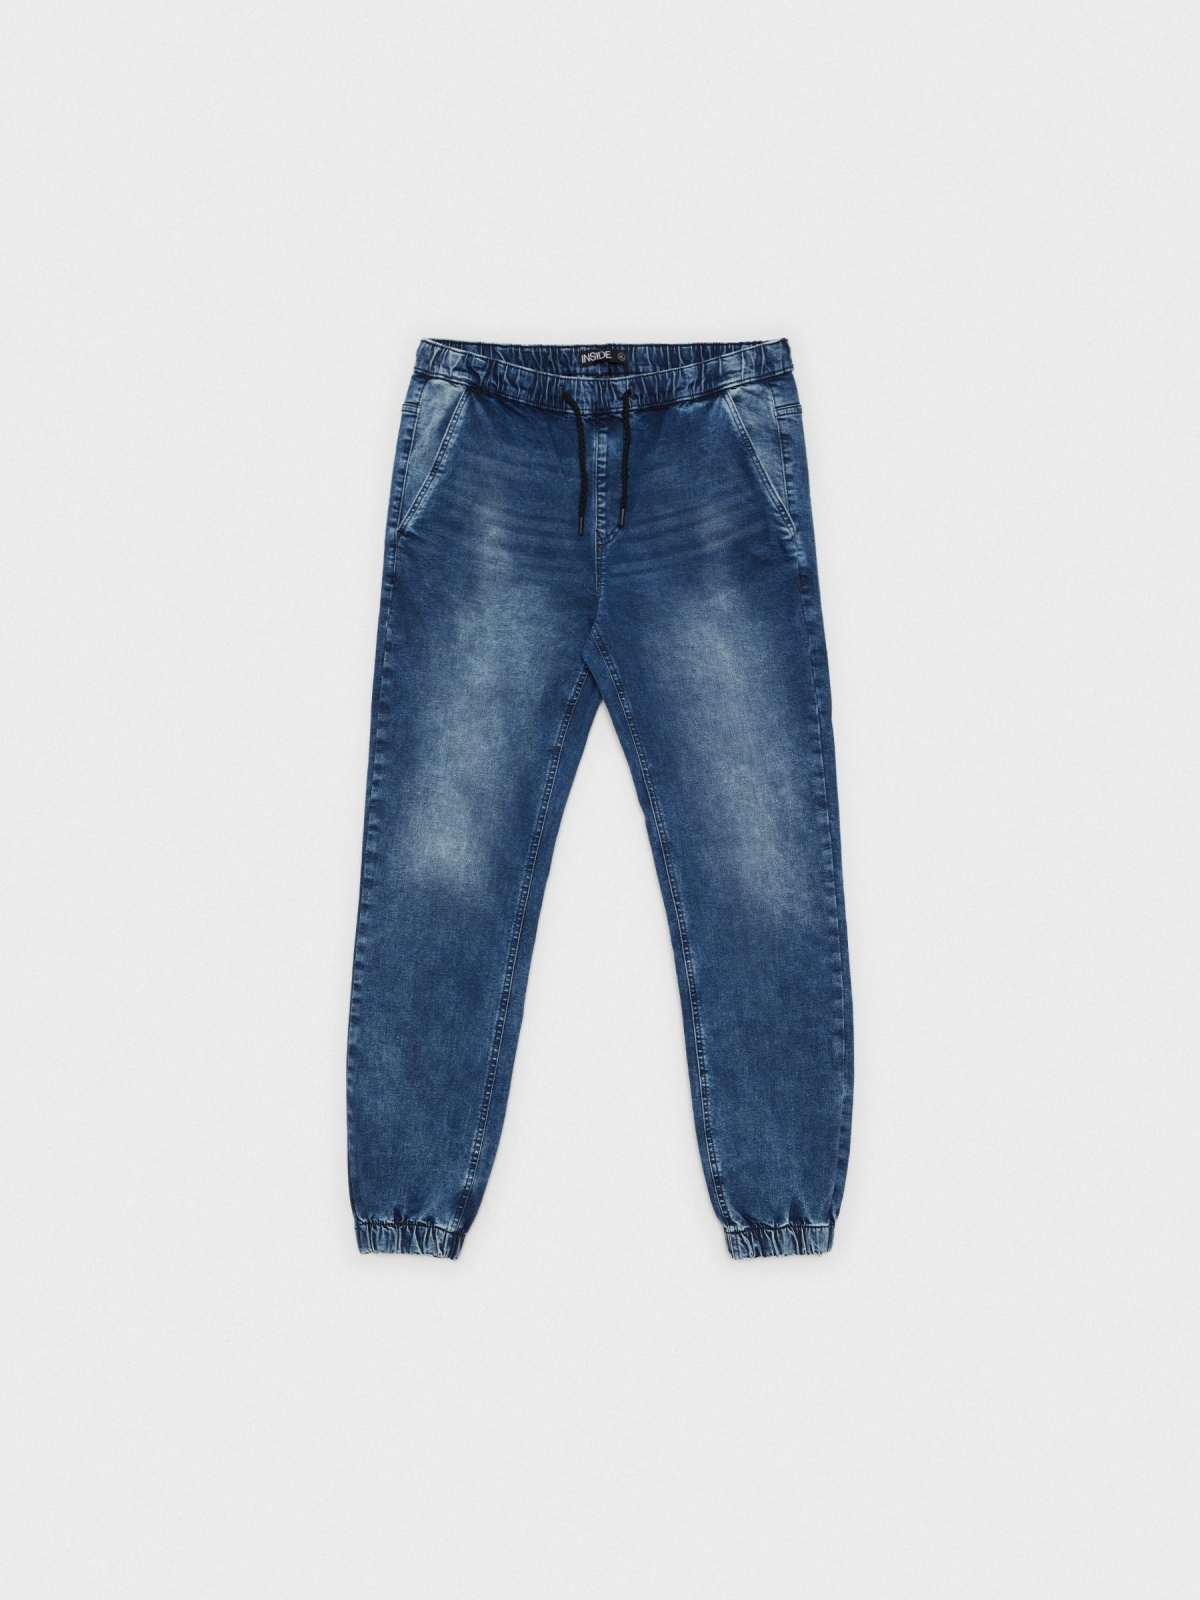  Denim jogger pants with rips blue